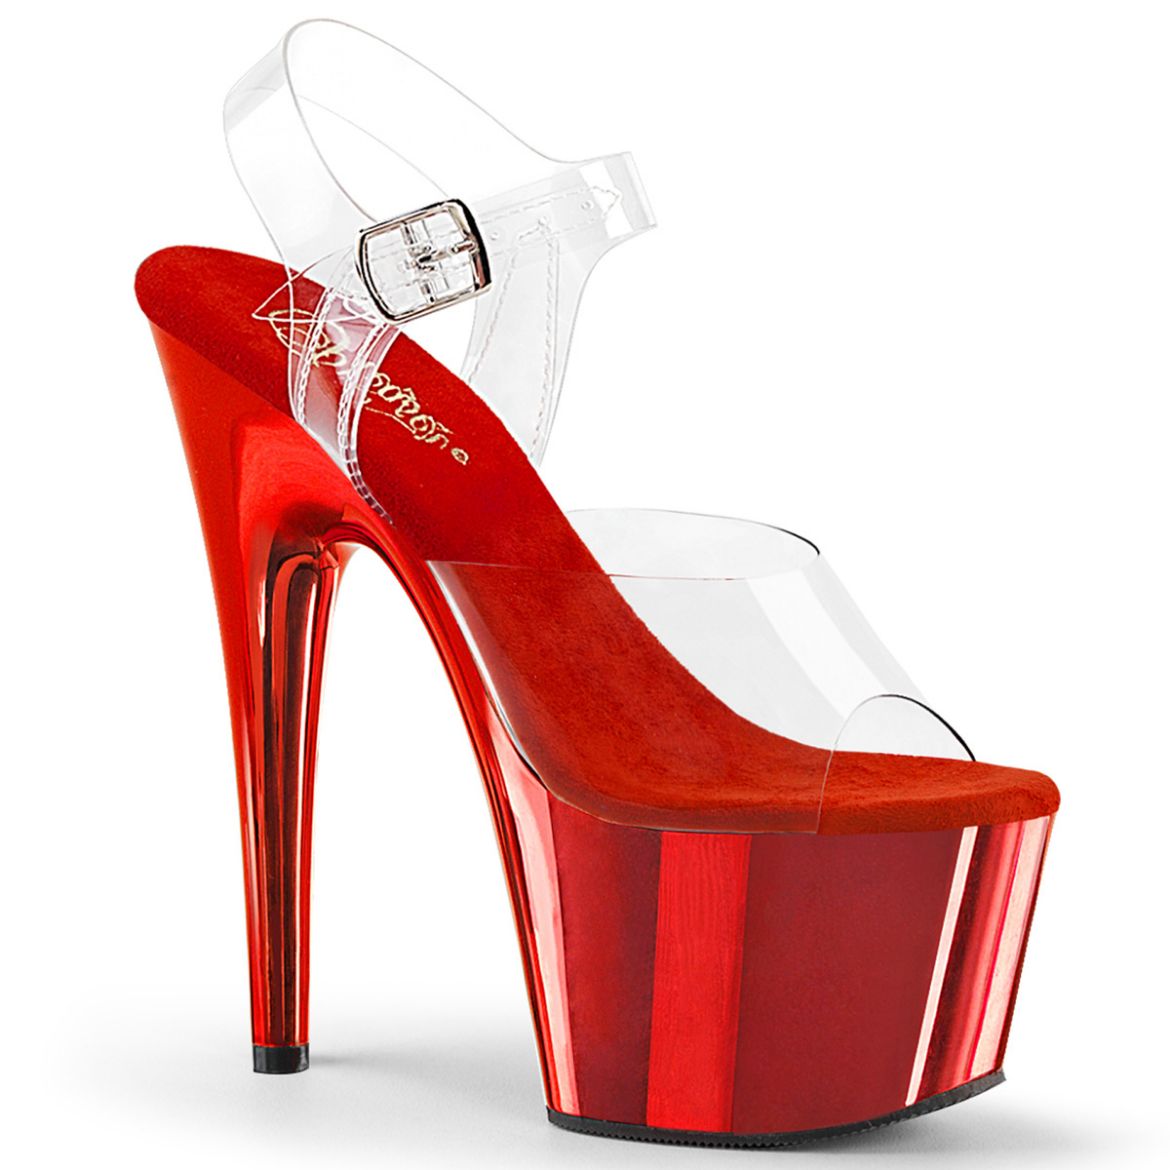 Product image of Pleaser ADORE-708 Clr-Matching/Red Chrome 7 Inch Heel 2 3/4 Inch PF Ankle Strap Sandal w/ Chrome Plated Btm